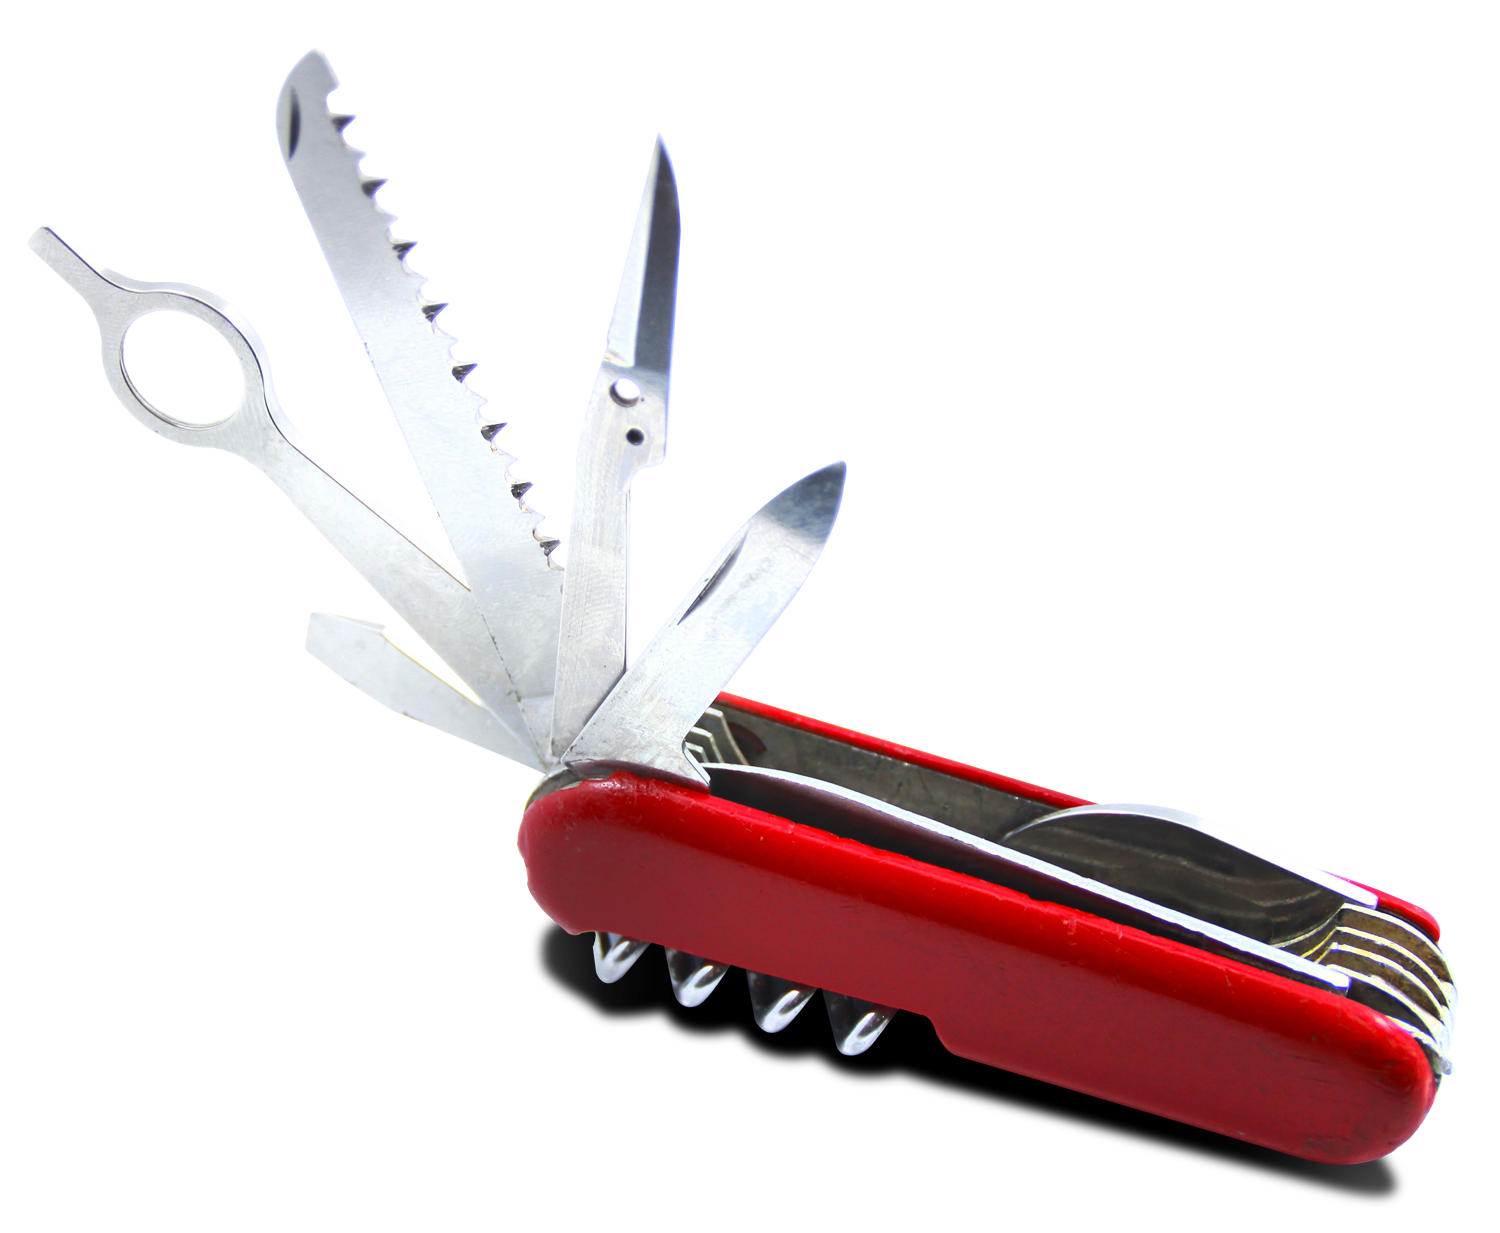 A Red Pocket Knife With Many Different Tools